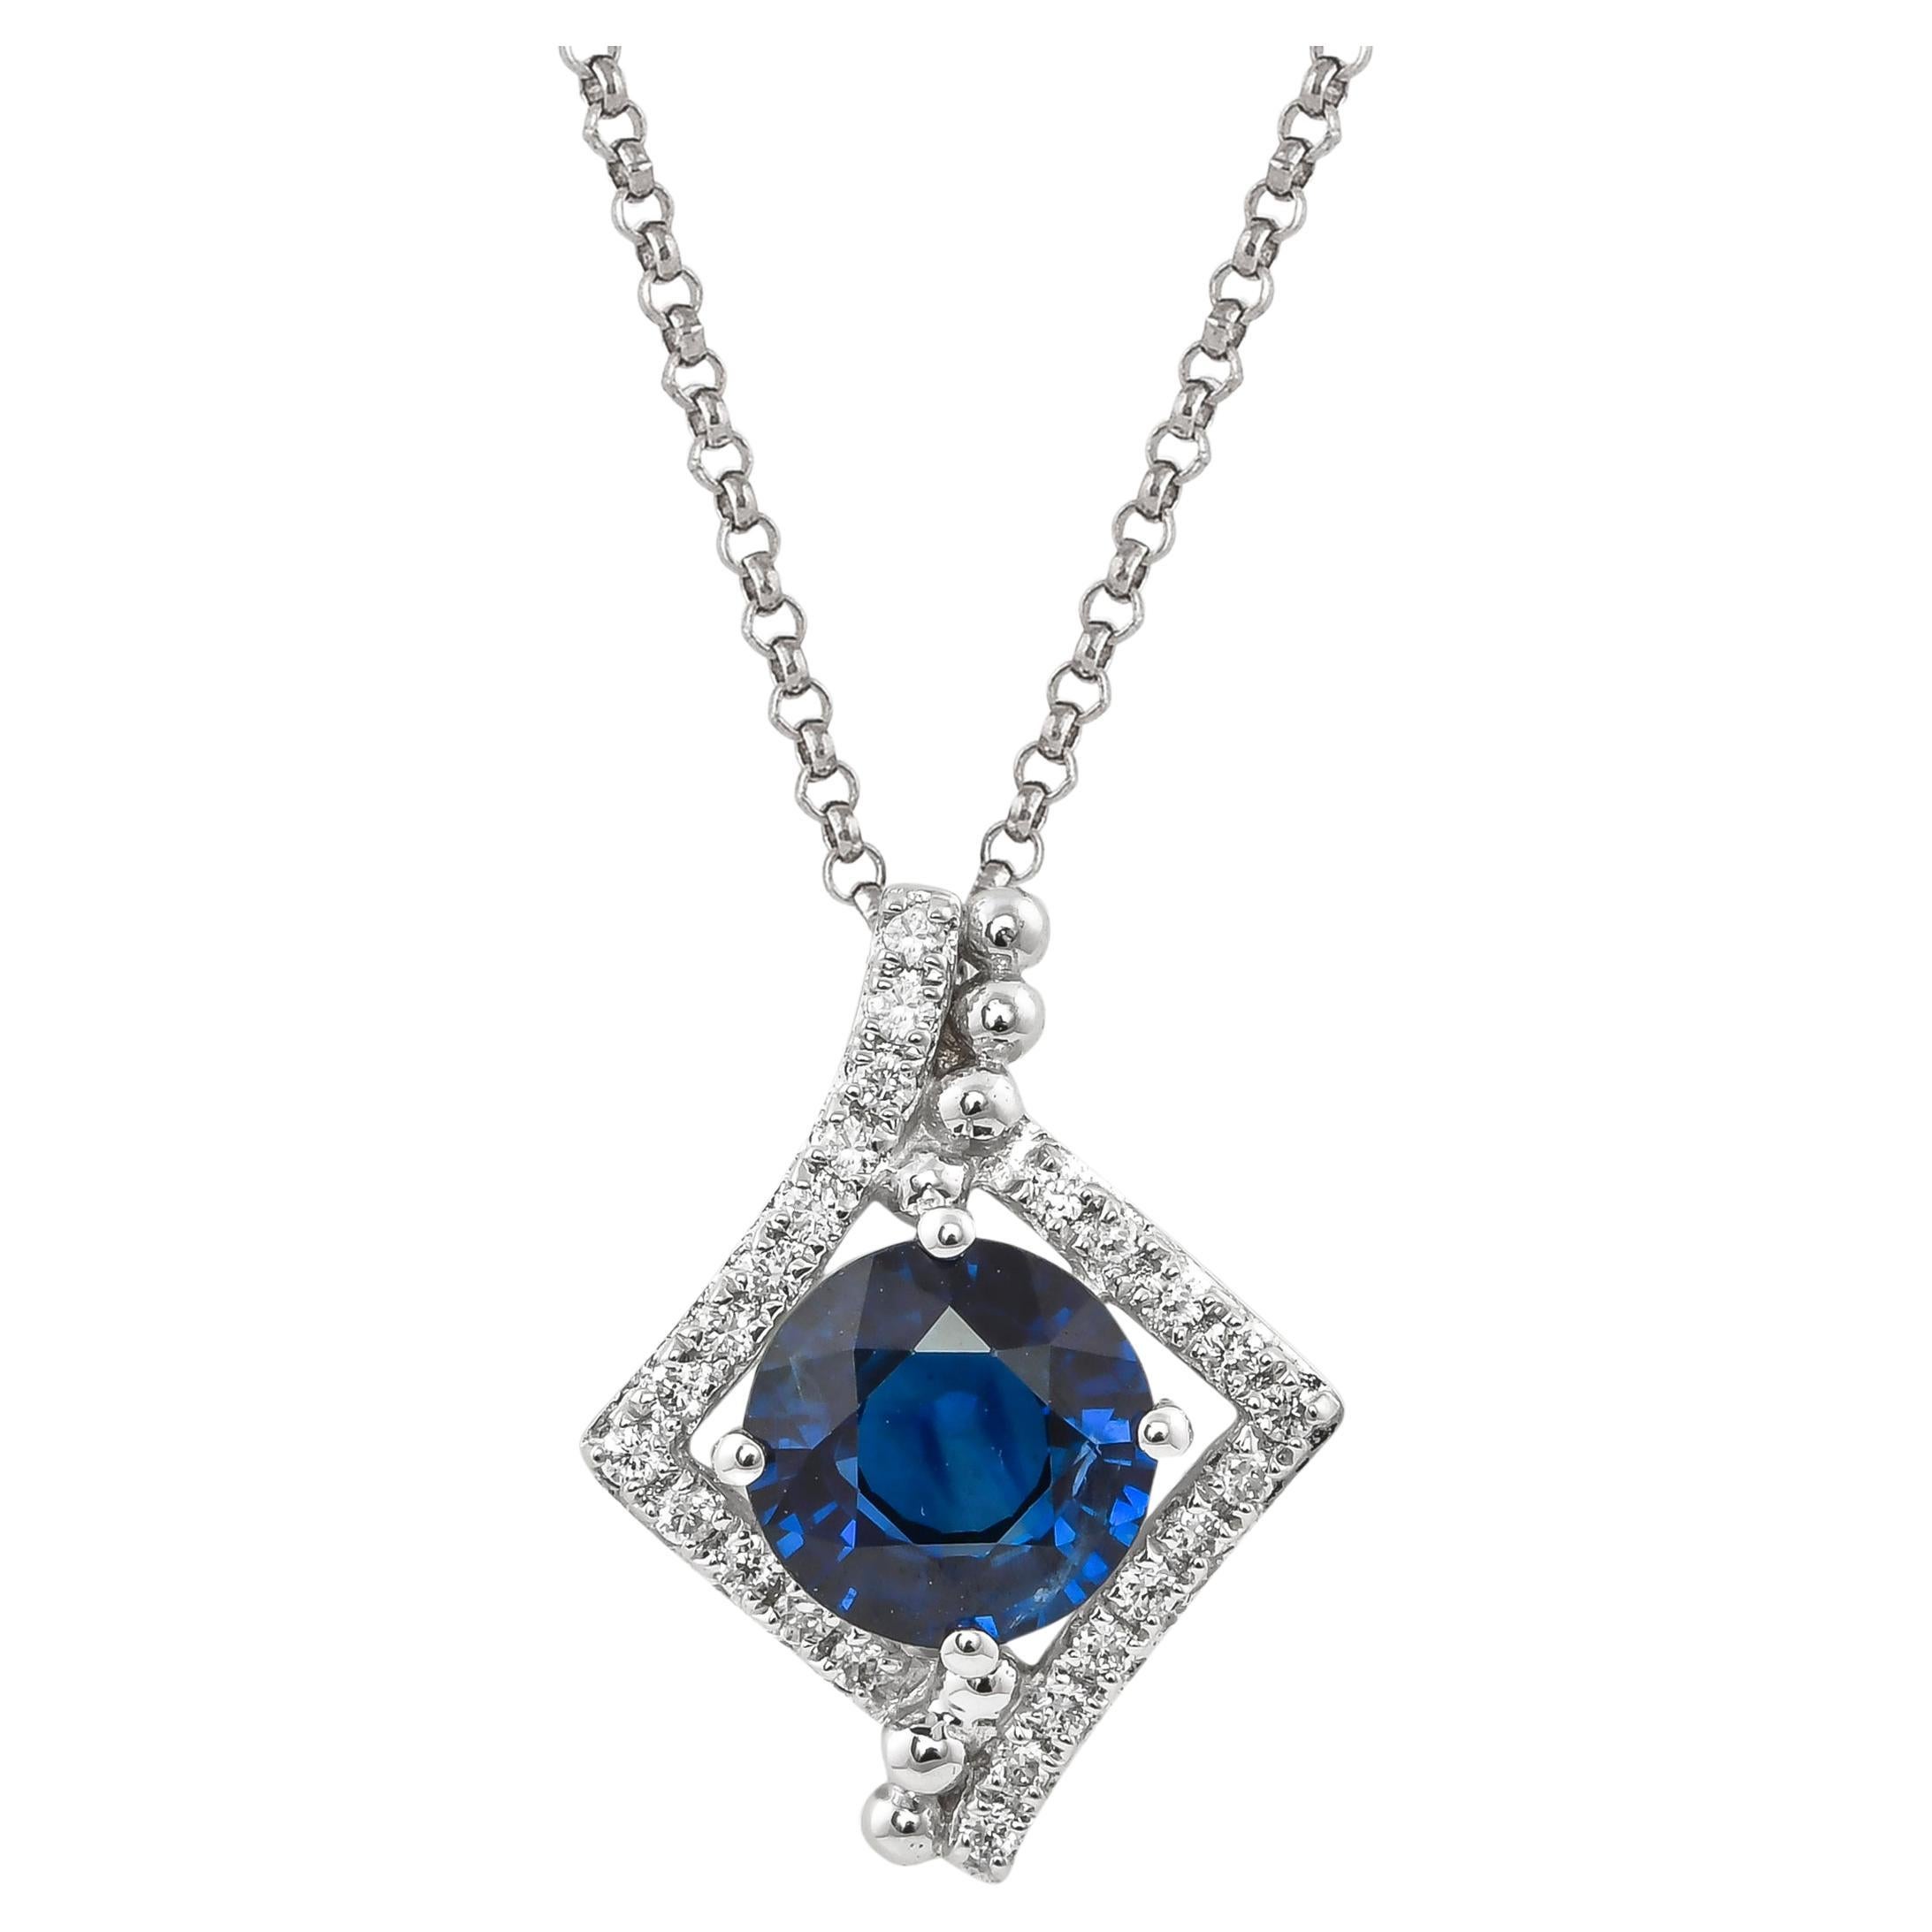 1.2 Carat Blue Sapphire and Diamond Pendant with Chain in 18 Karat White Gold